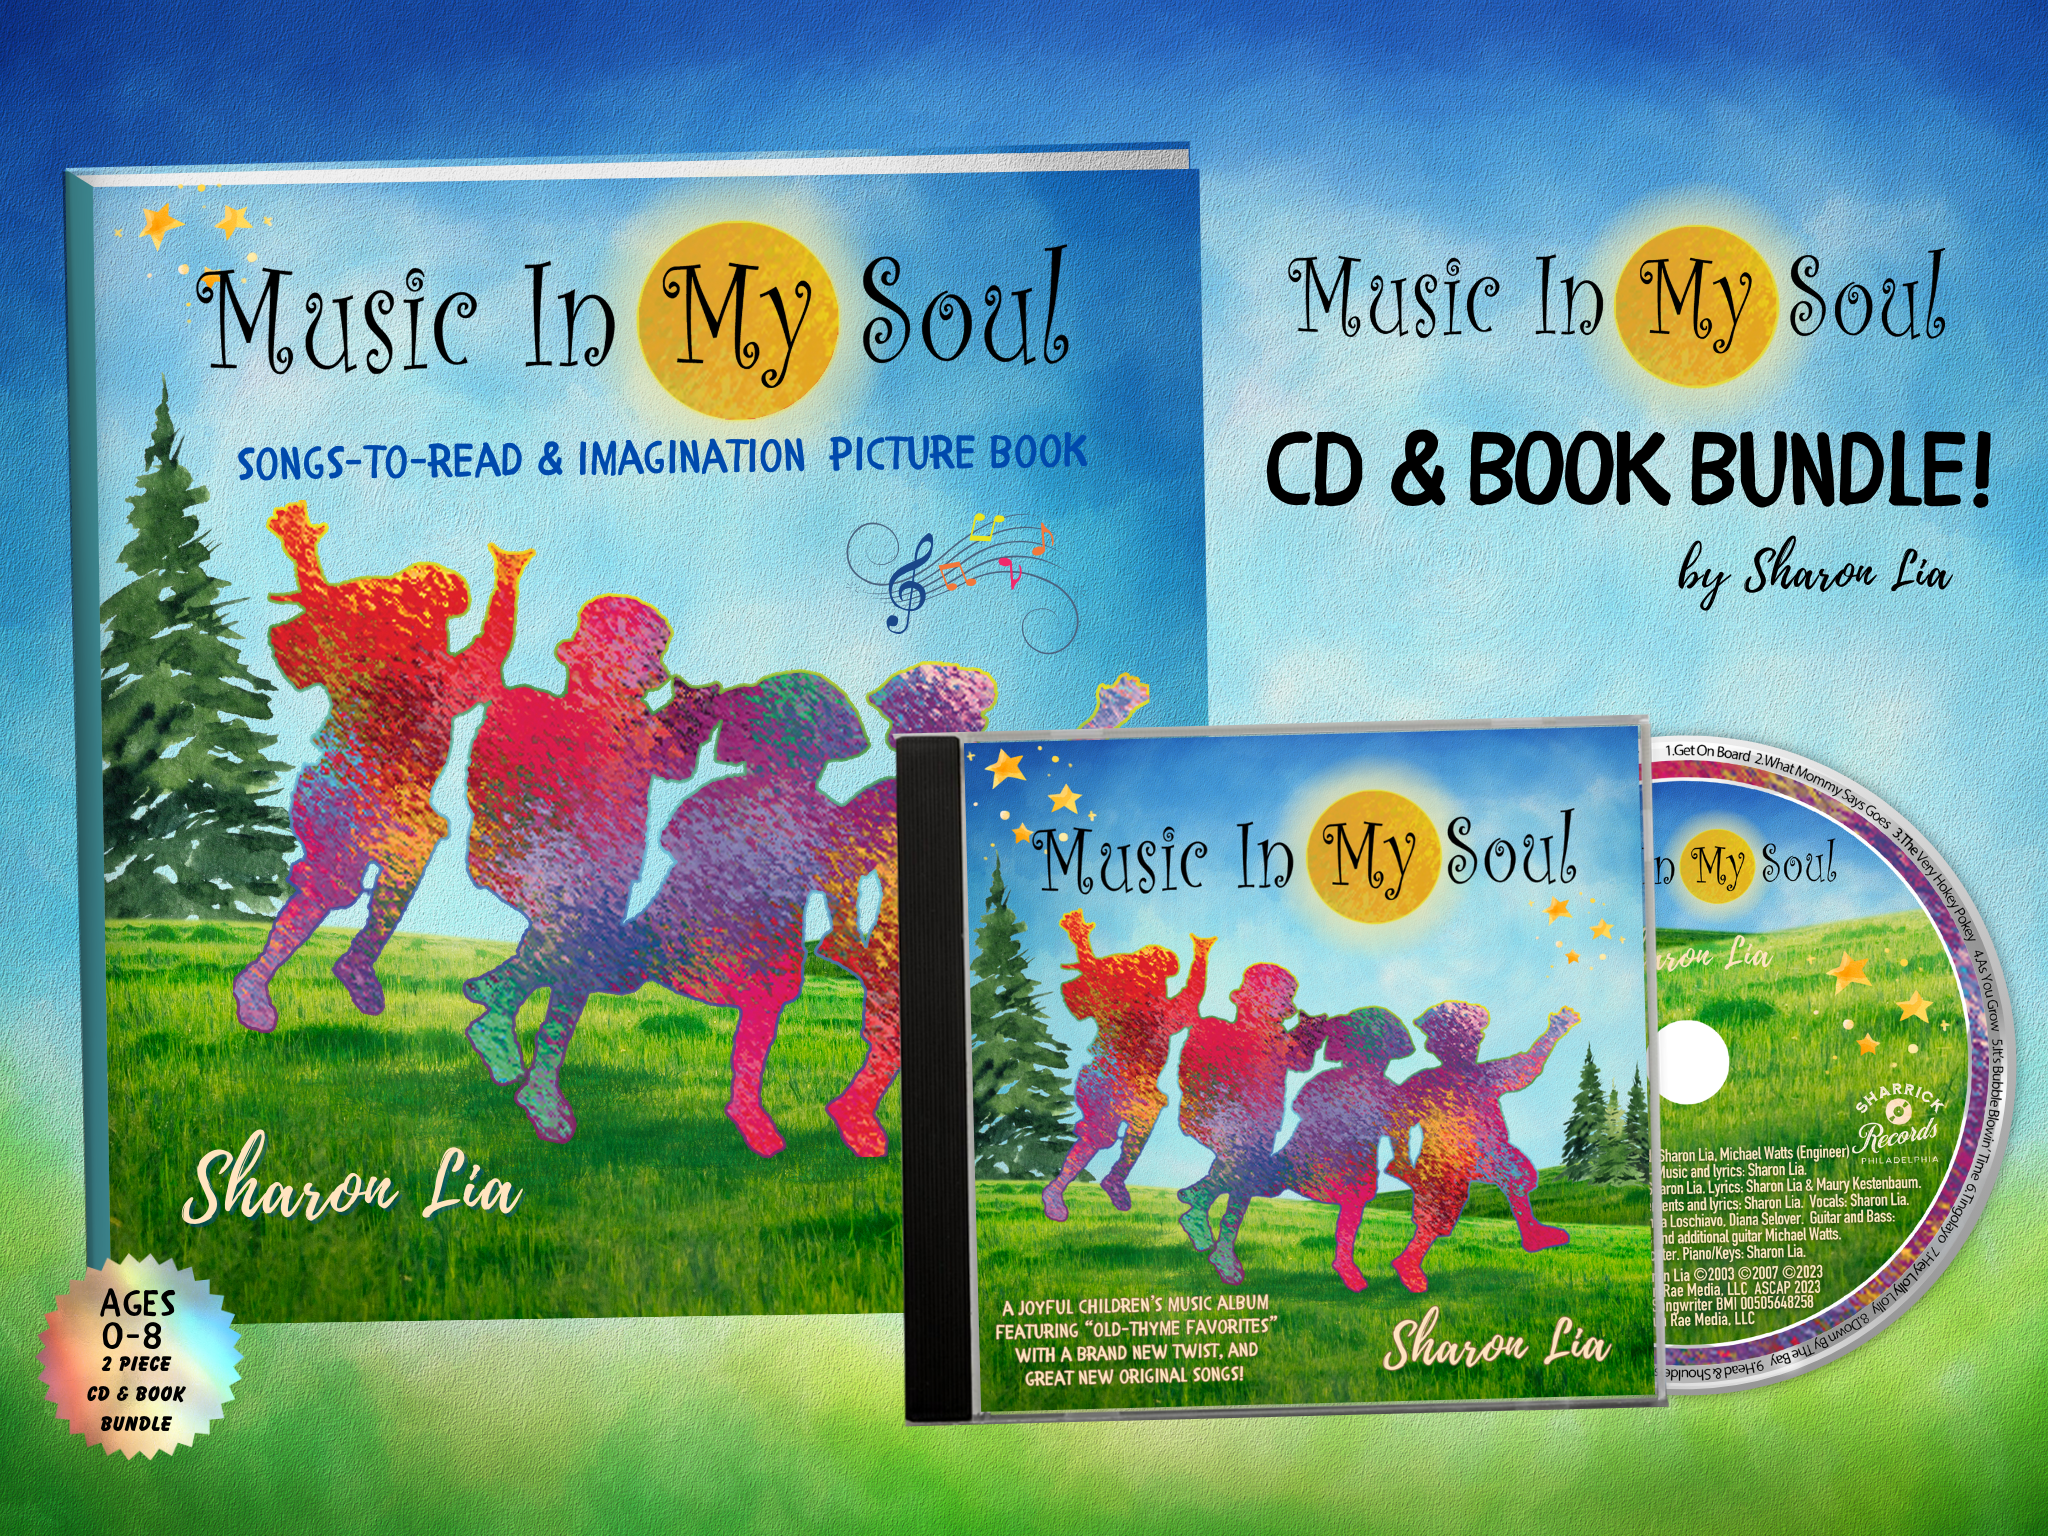 New Book and CD launched!